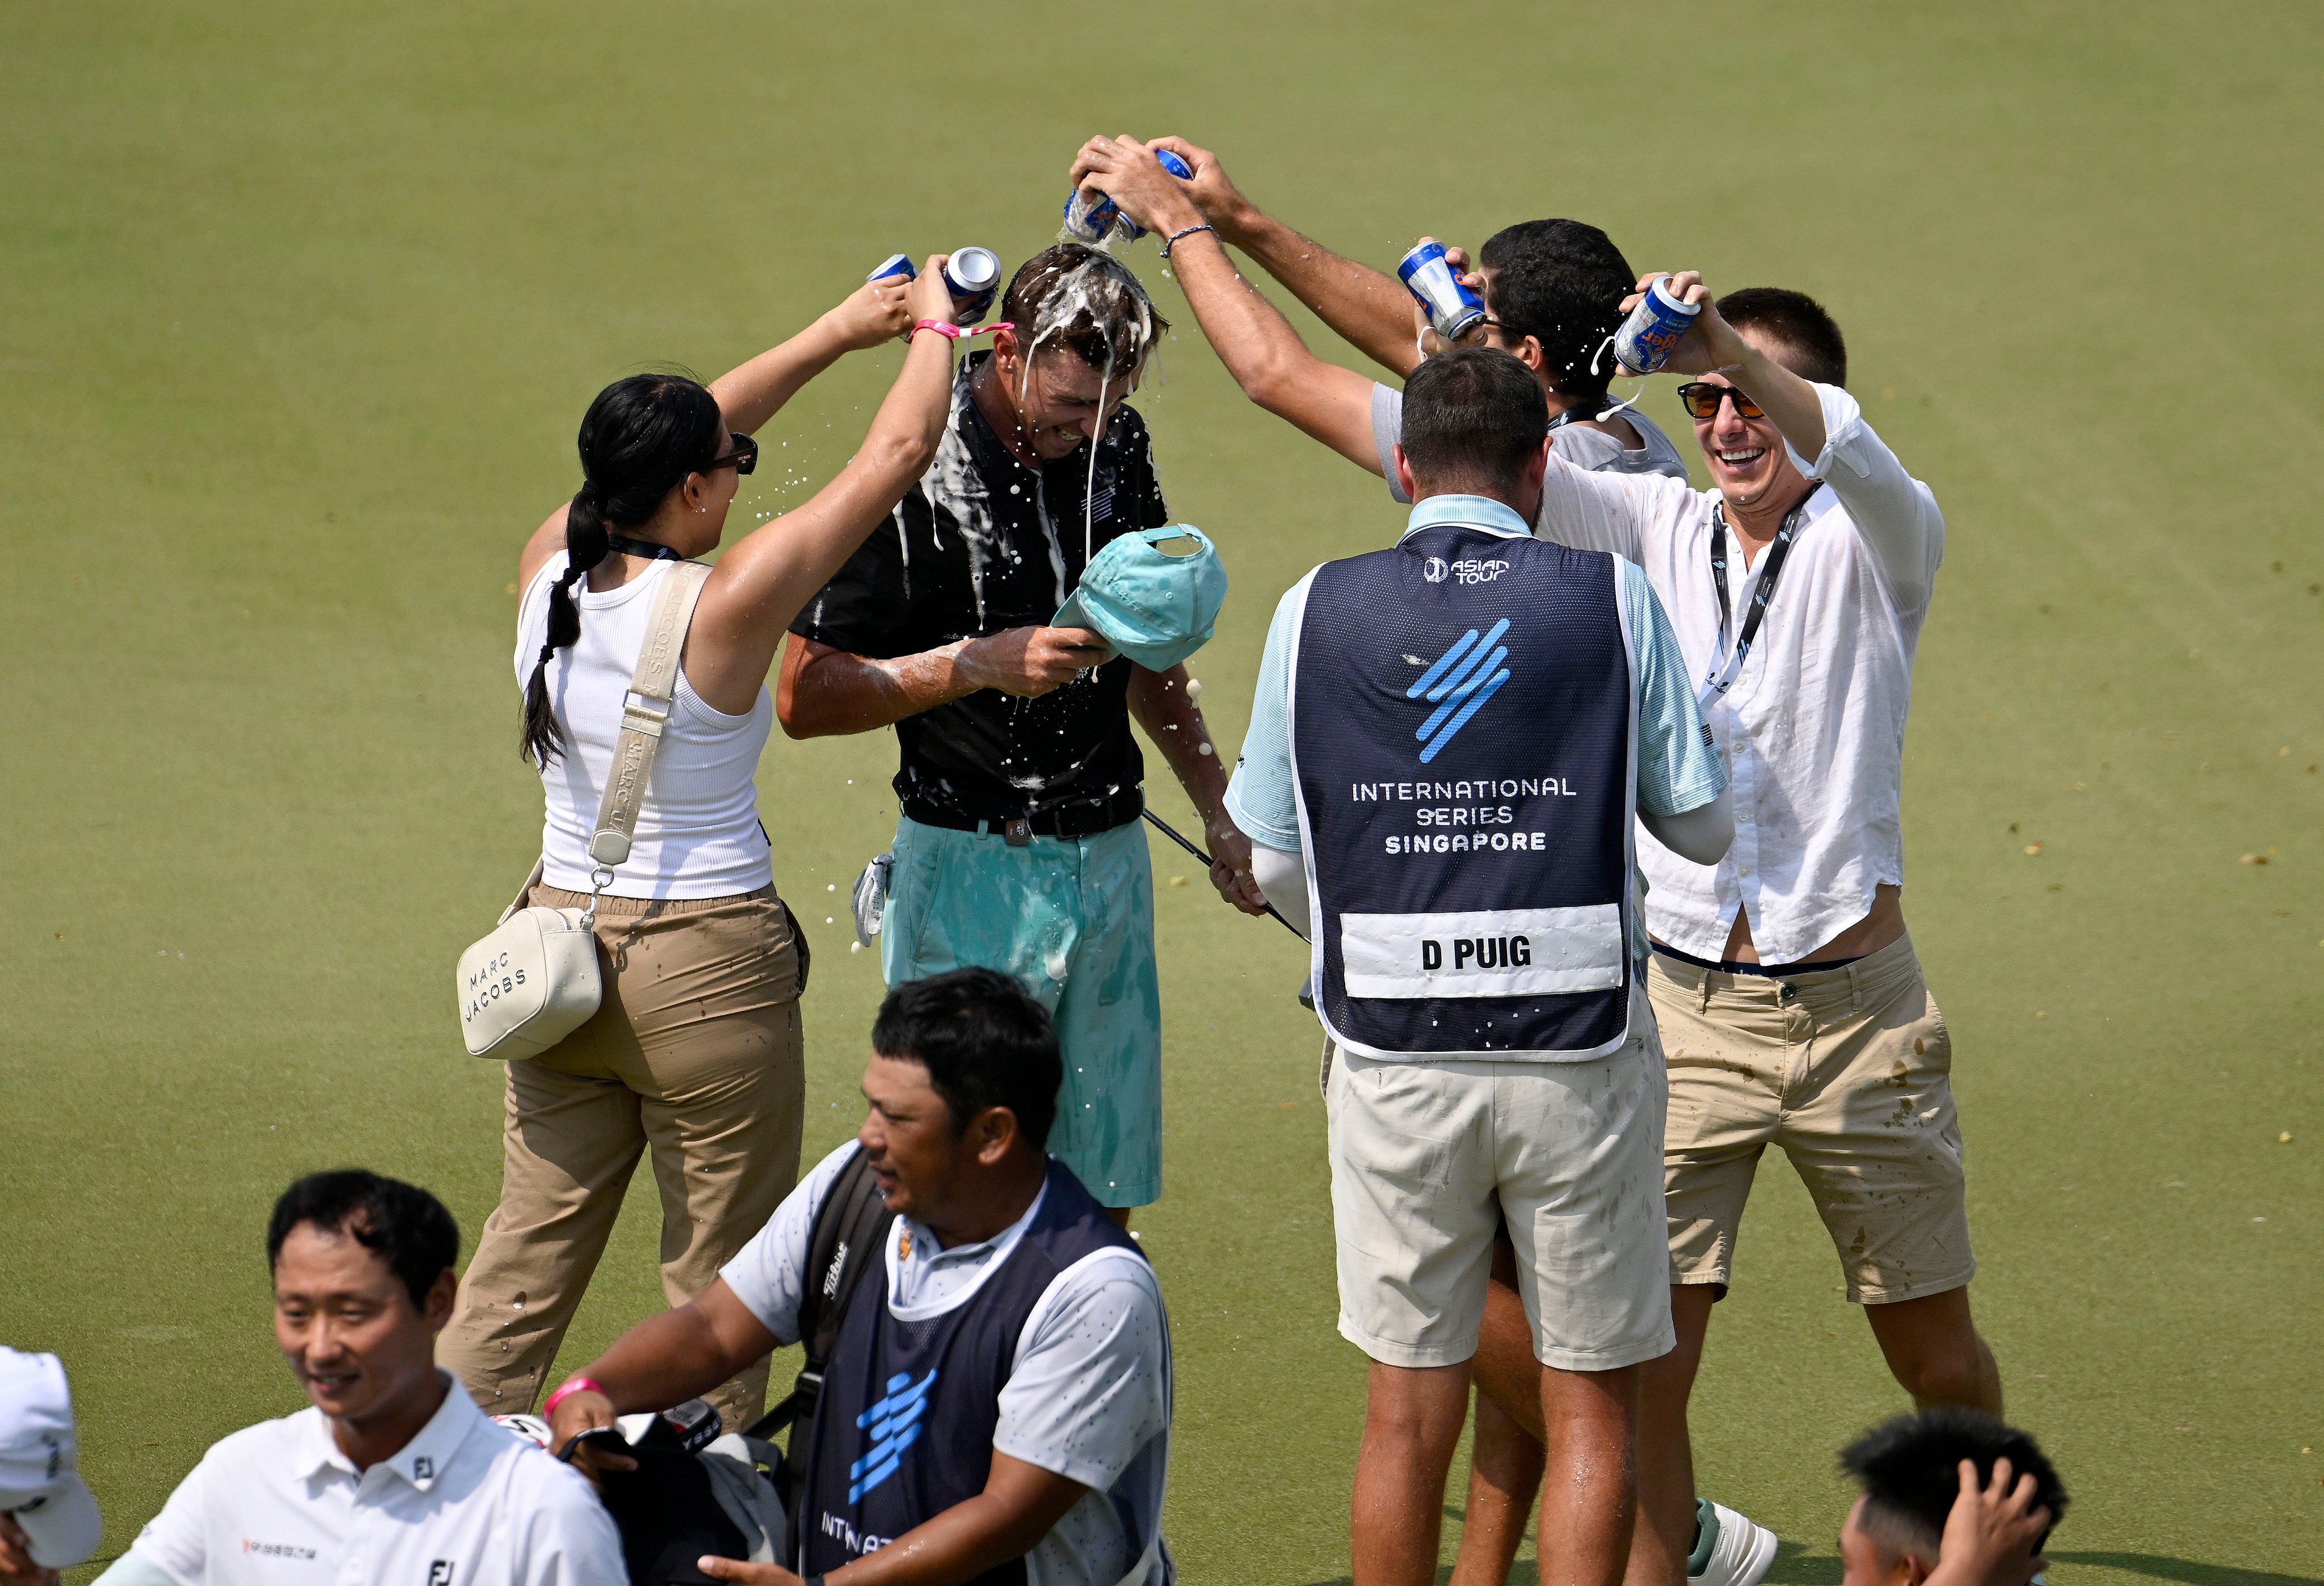 David Puig gets a soaking on the 18th green after winning the International Series Singapore at the Tanah Merah Country Club. Photo: Asian Tour